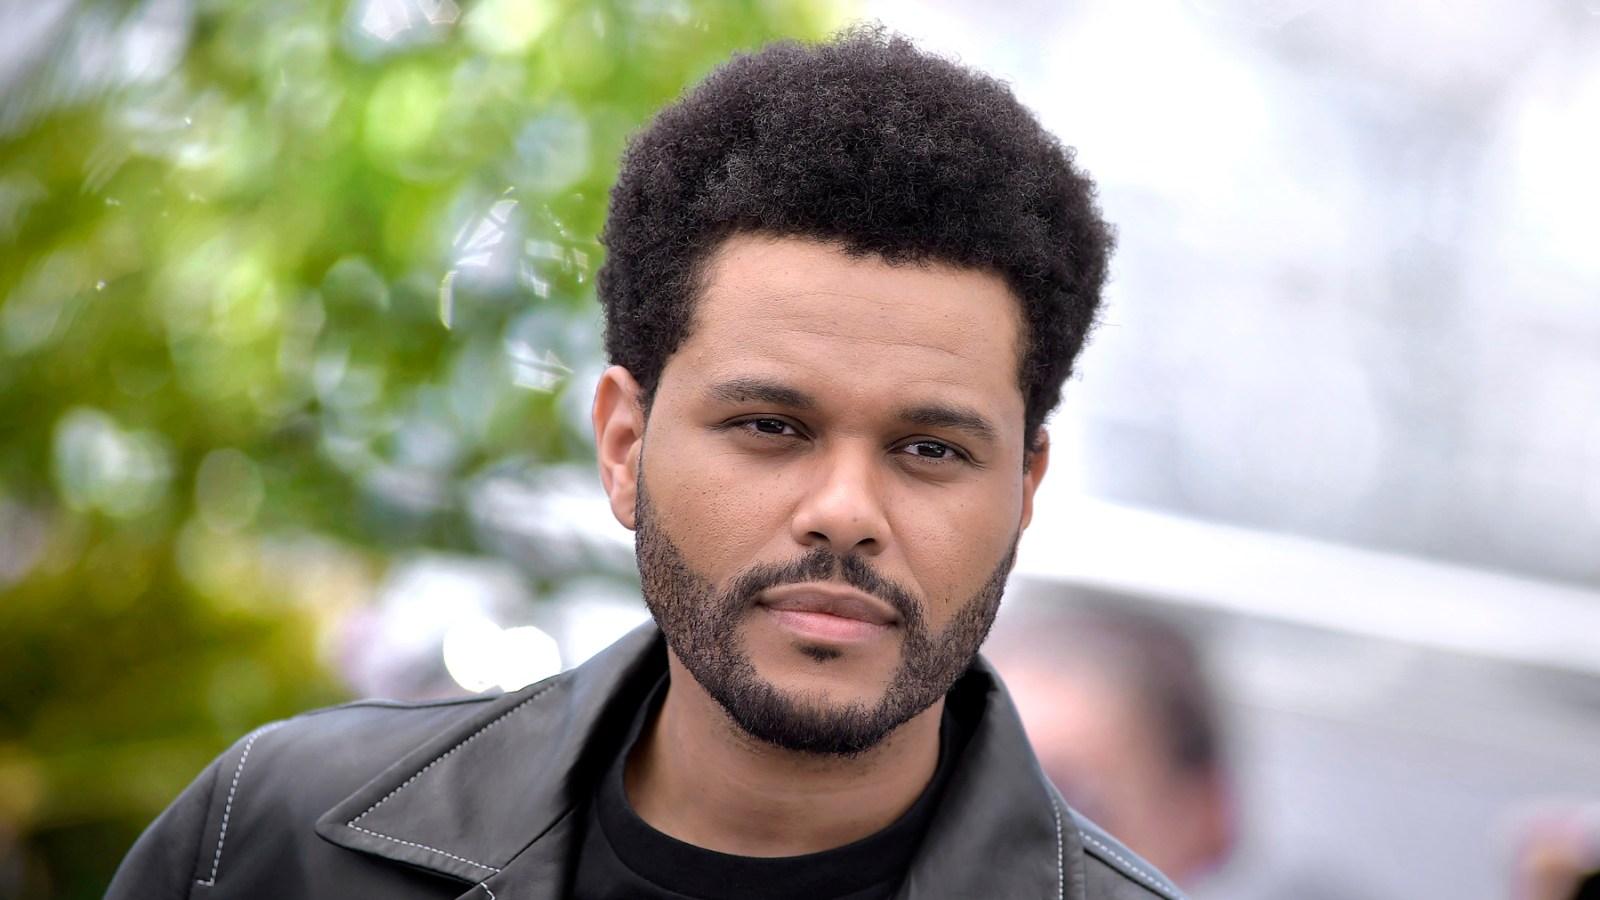 The Weeknd Donates $2 Million to Provide 18 Million Loaves of Bread to Gaza Families